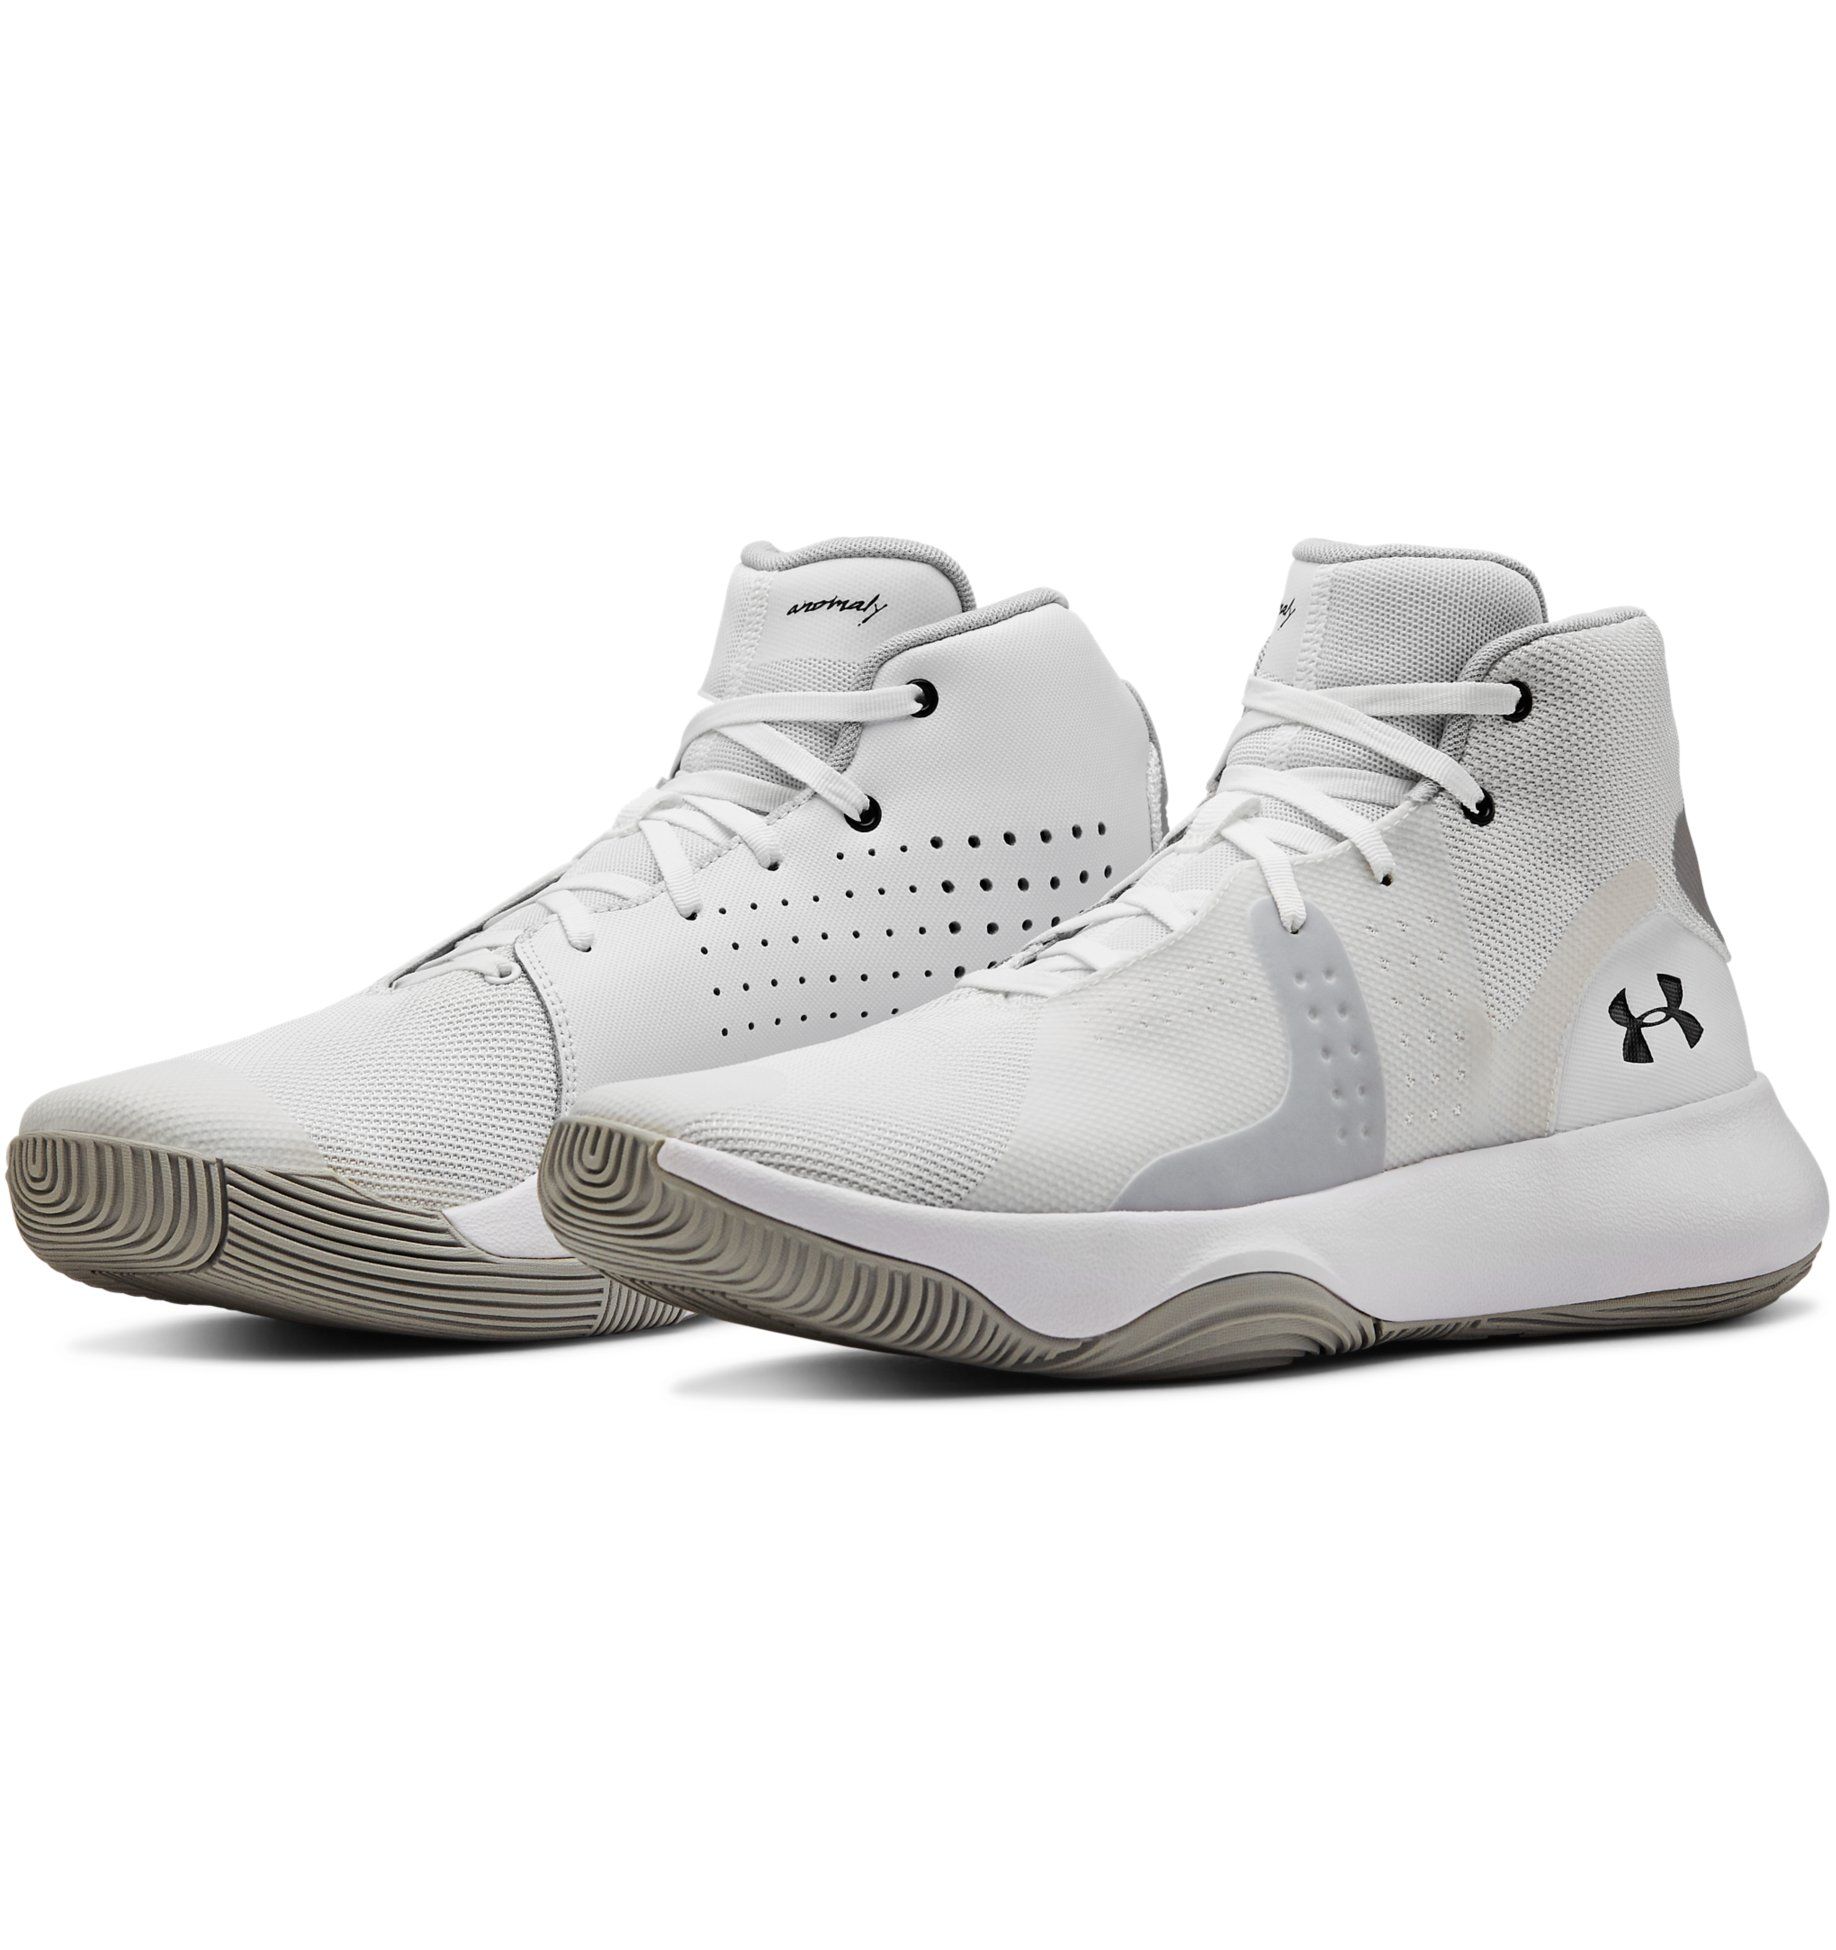 solid white basketball shoes